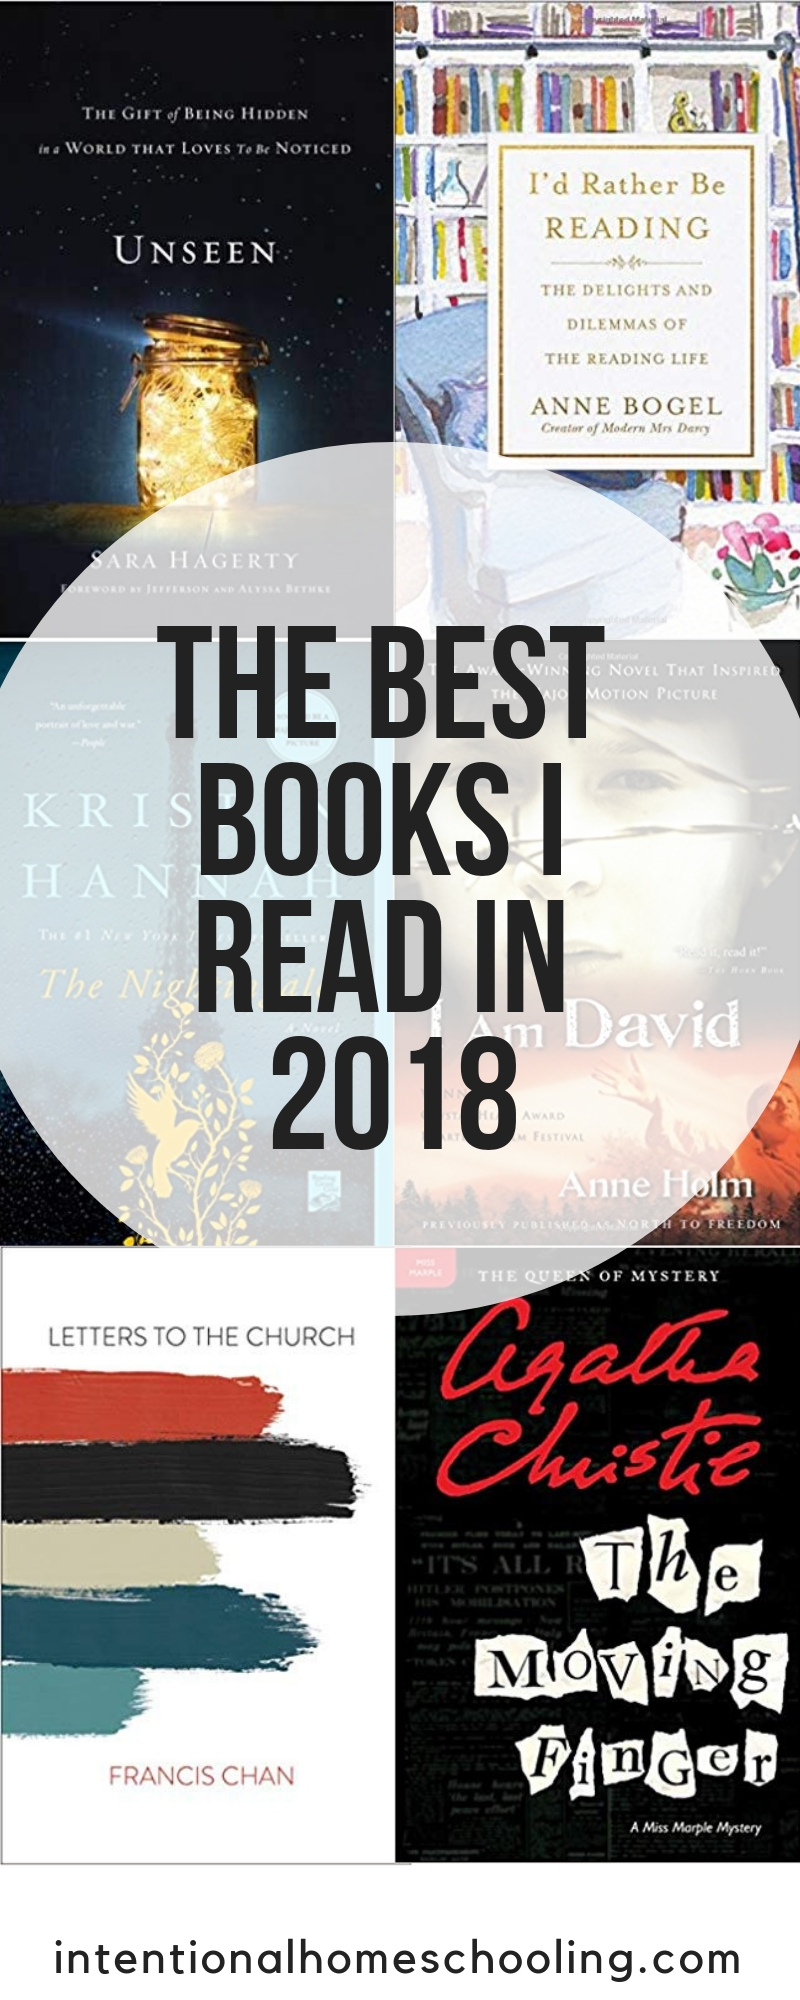 The best fiction and non-fiction chapter books I read in 2018